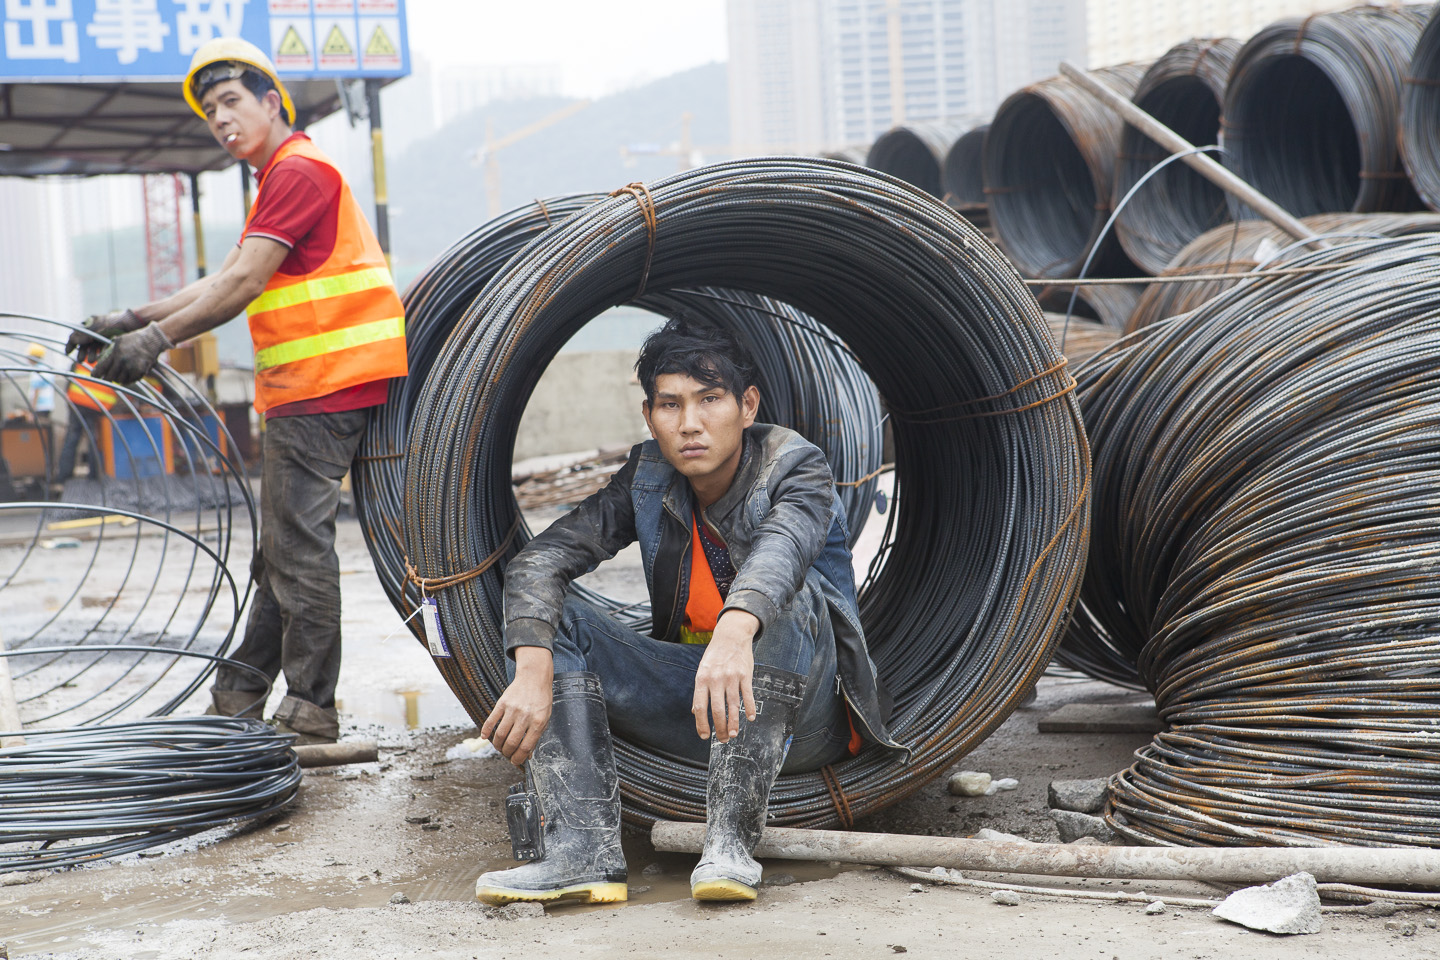 Many of the construction workers in China have migrated from rural areas to look for wealth in the cities that are being erected all round China. This migrant worker has just finished a long day shift and is taking a break before resting for the night.